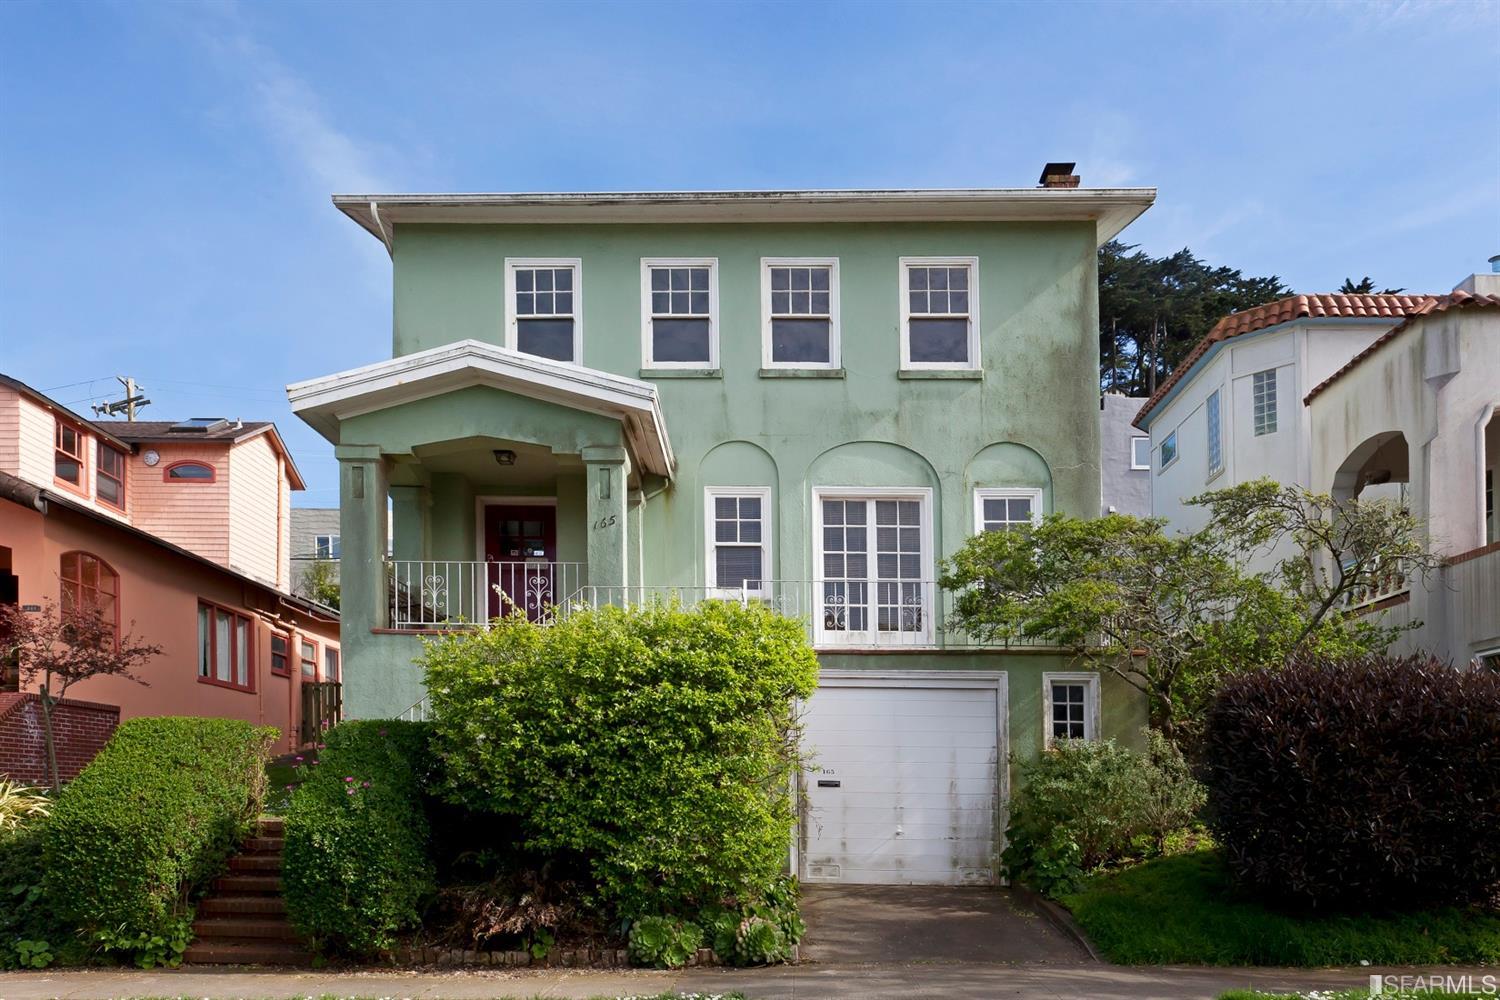 Top 10 Overbids And Some Very Interesting Outer Sunset / Parkside Data